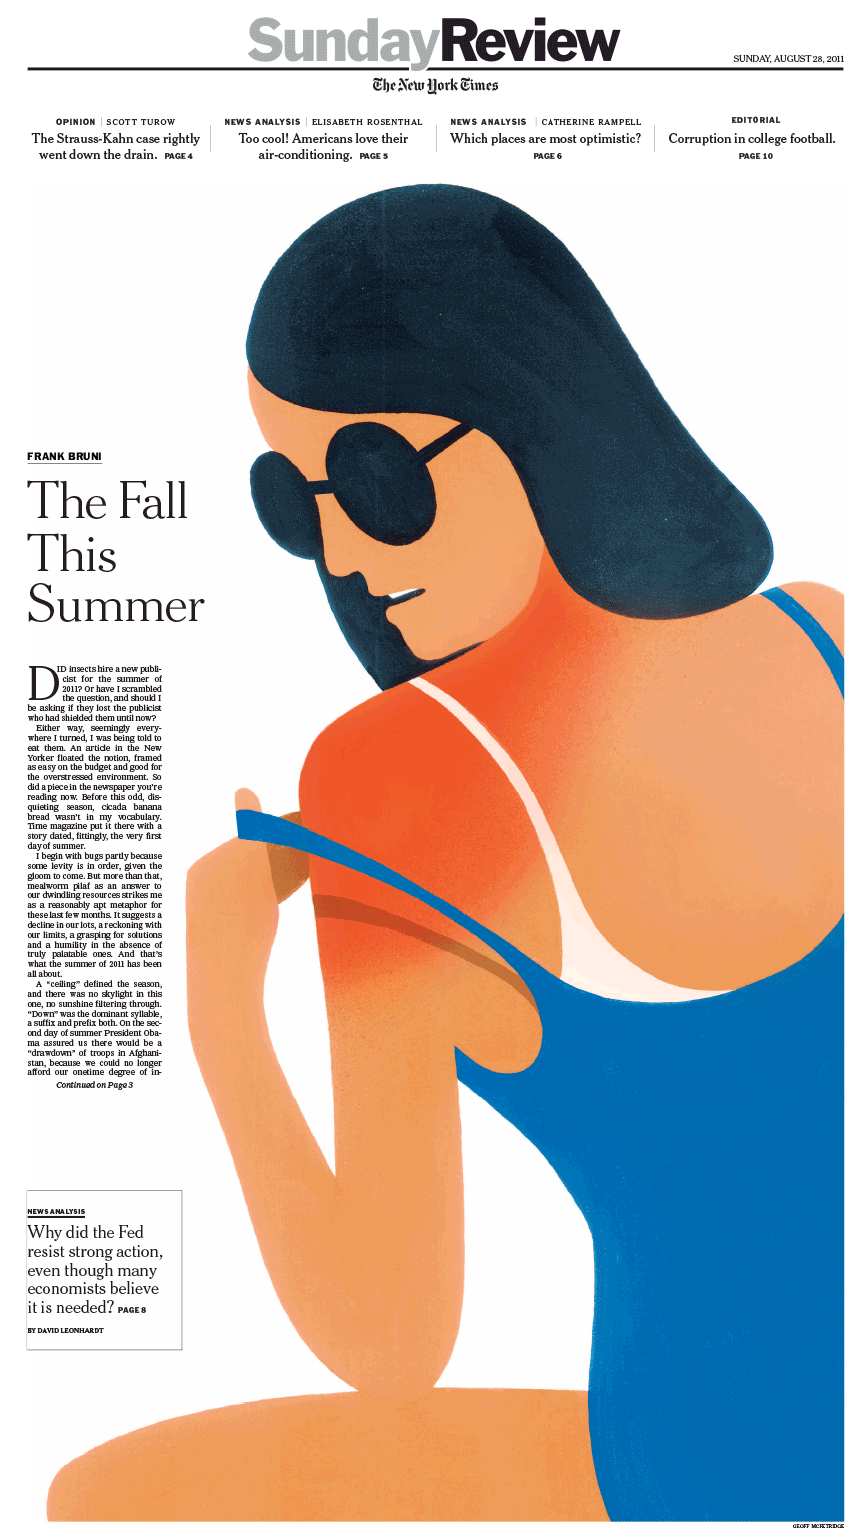 Sunday Review Cover: The Fall This Summer